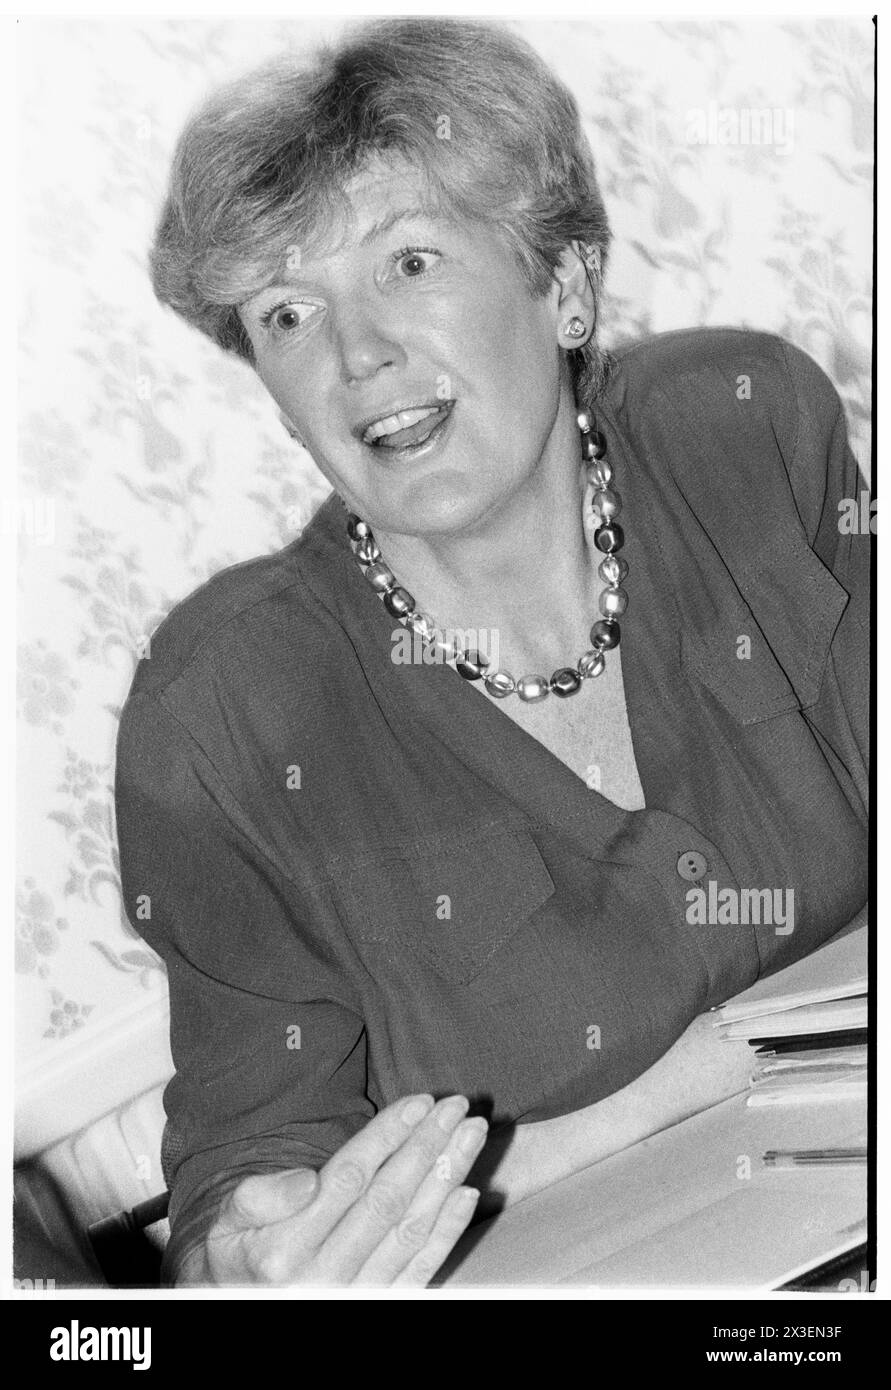 ANN TAYLOR MP, HOUSES OF PARLIAMENT OFFICE, 1993: A young portrait of ...